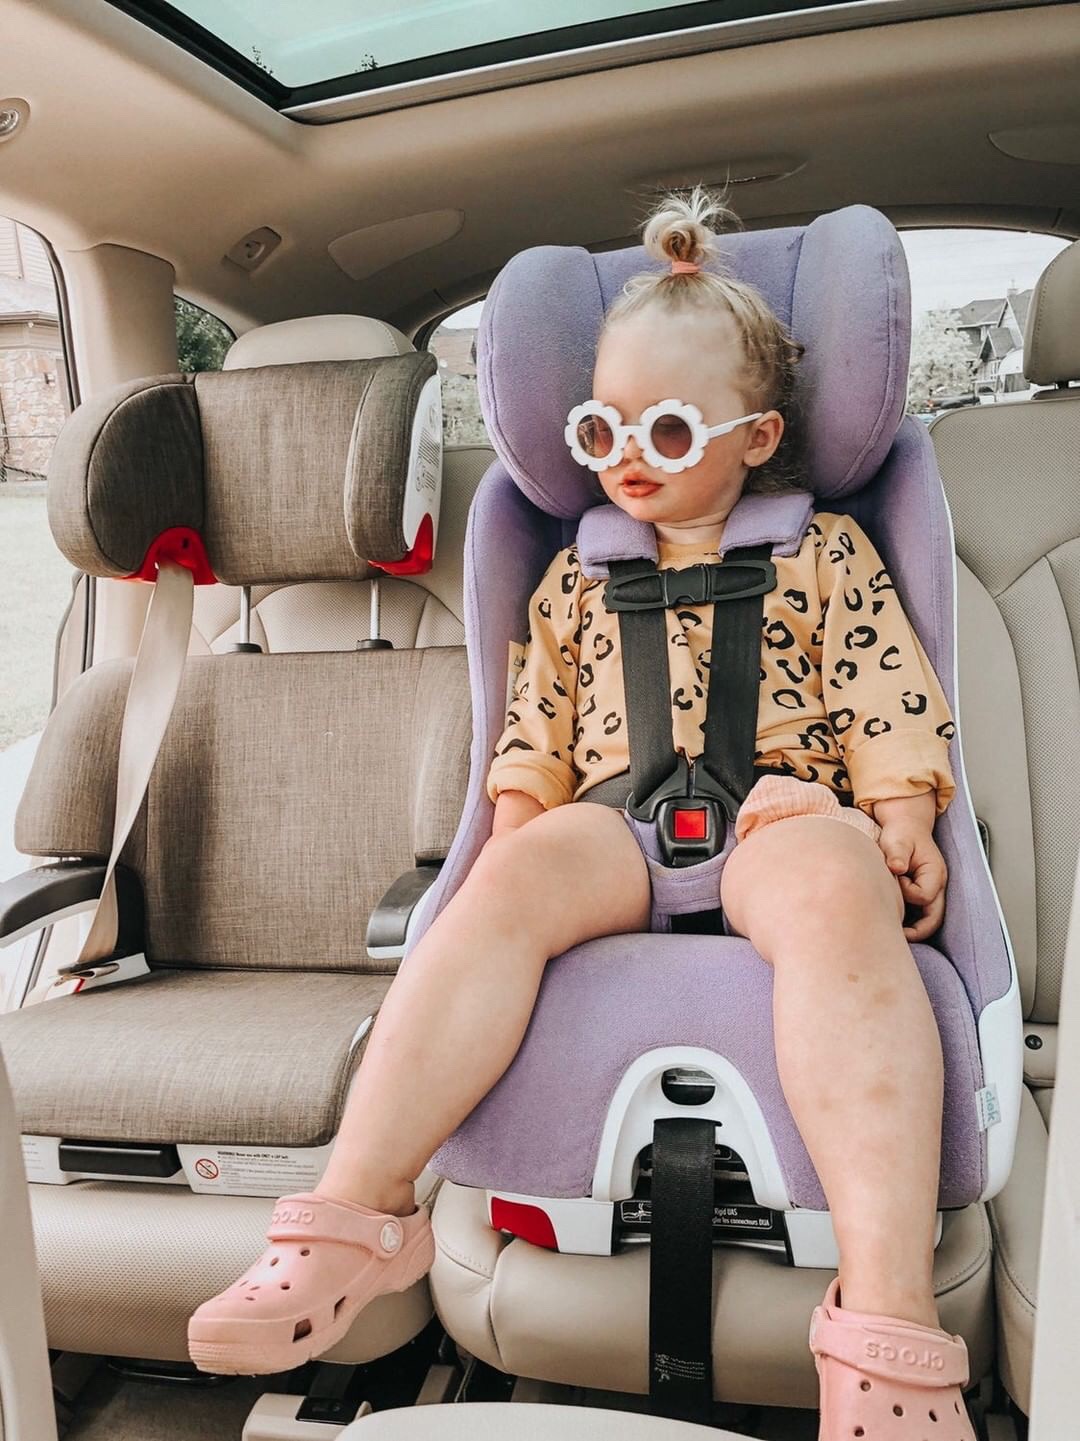 best convertible car seat for hot weather